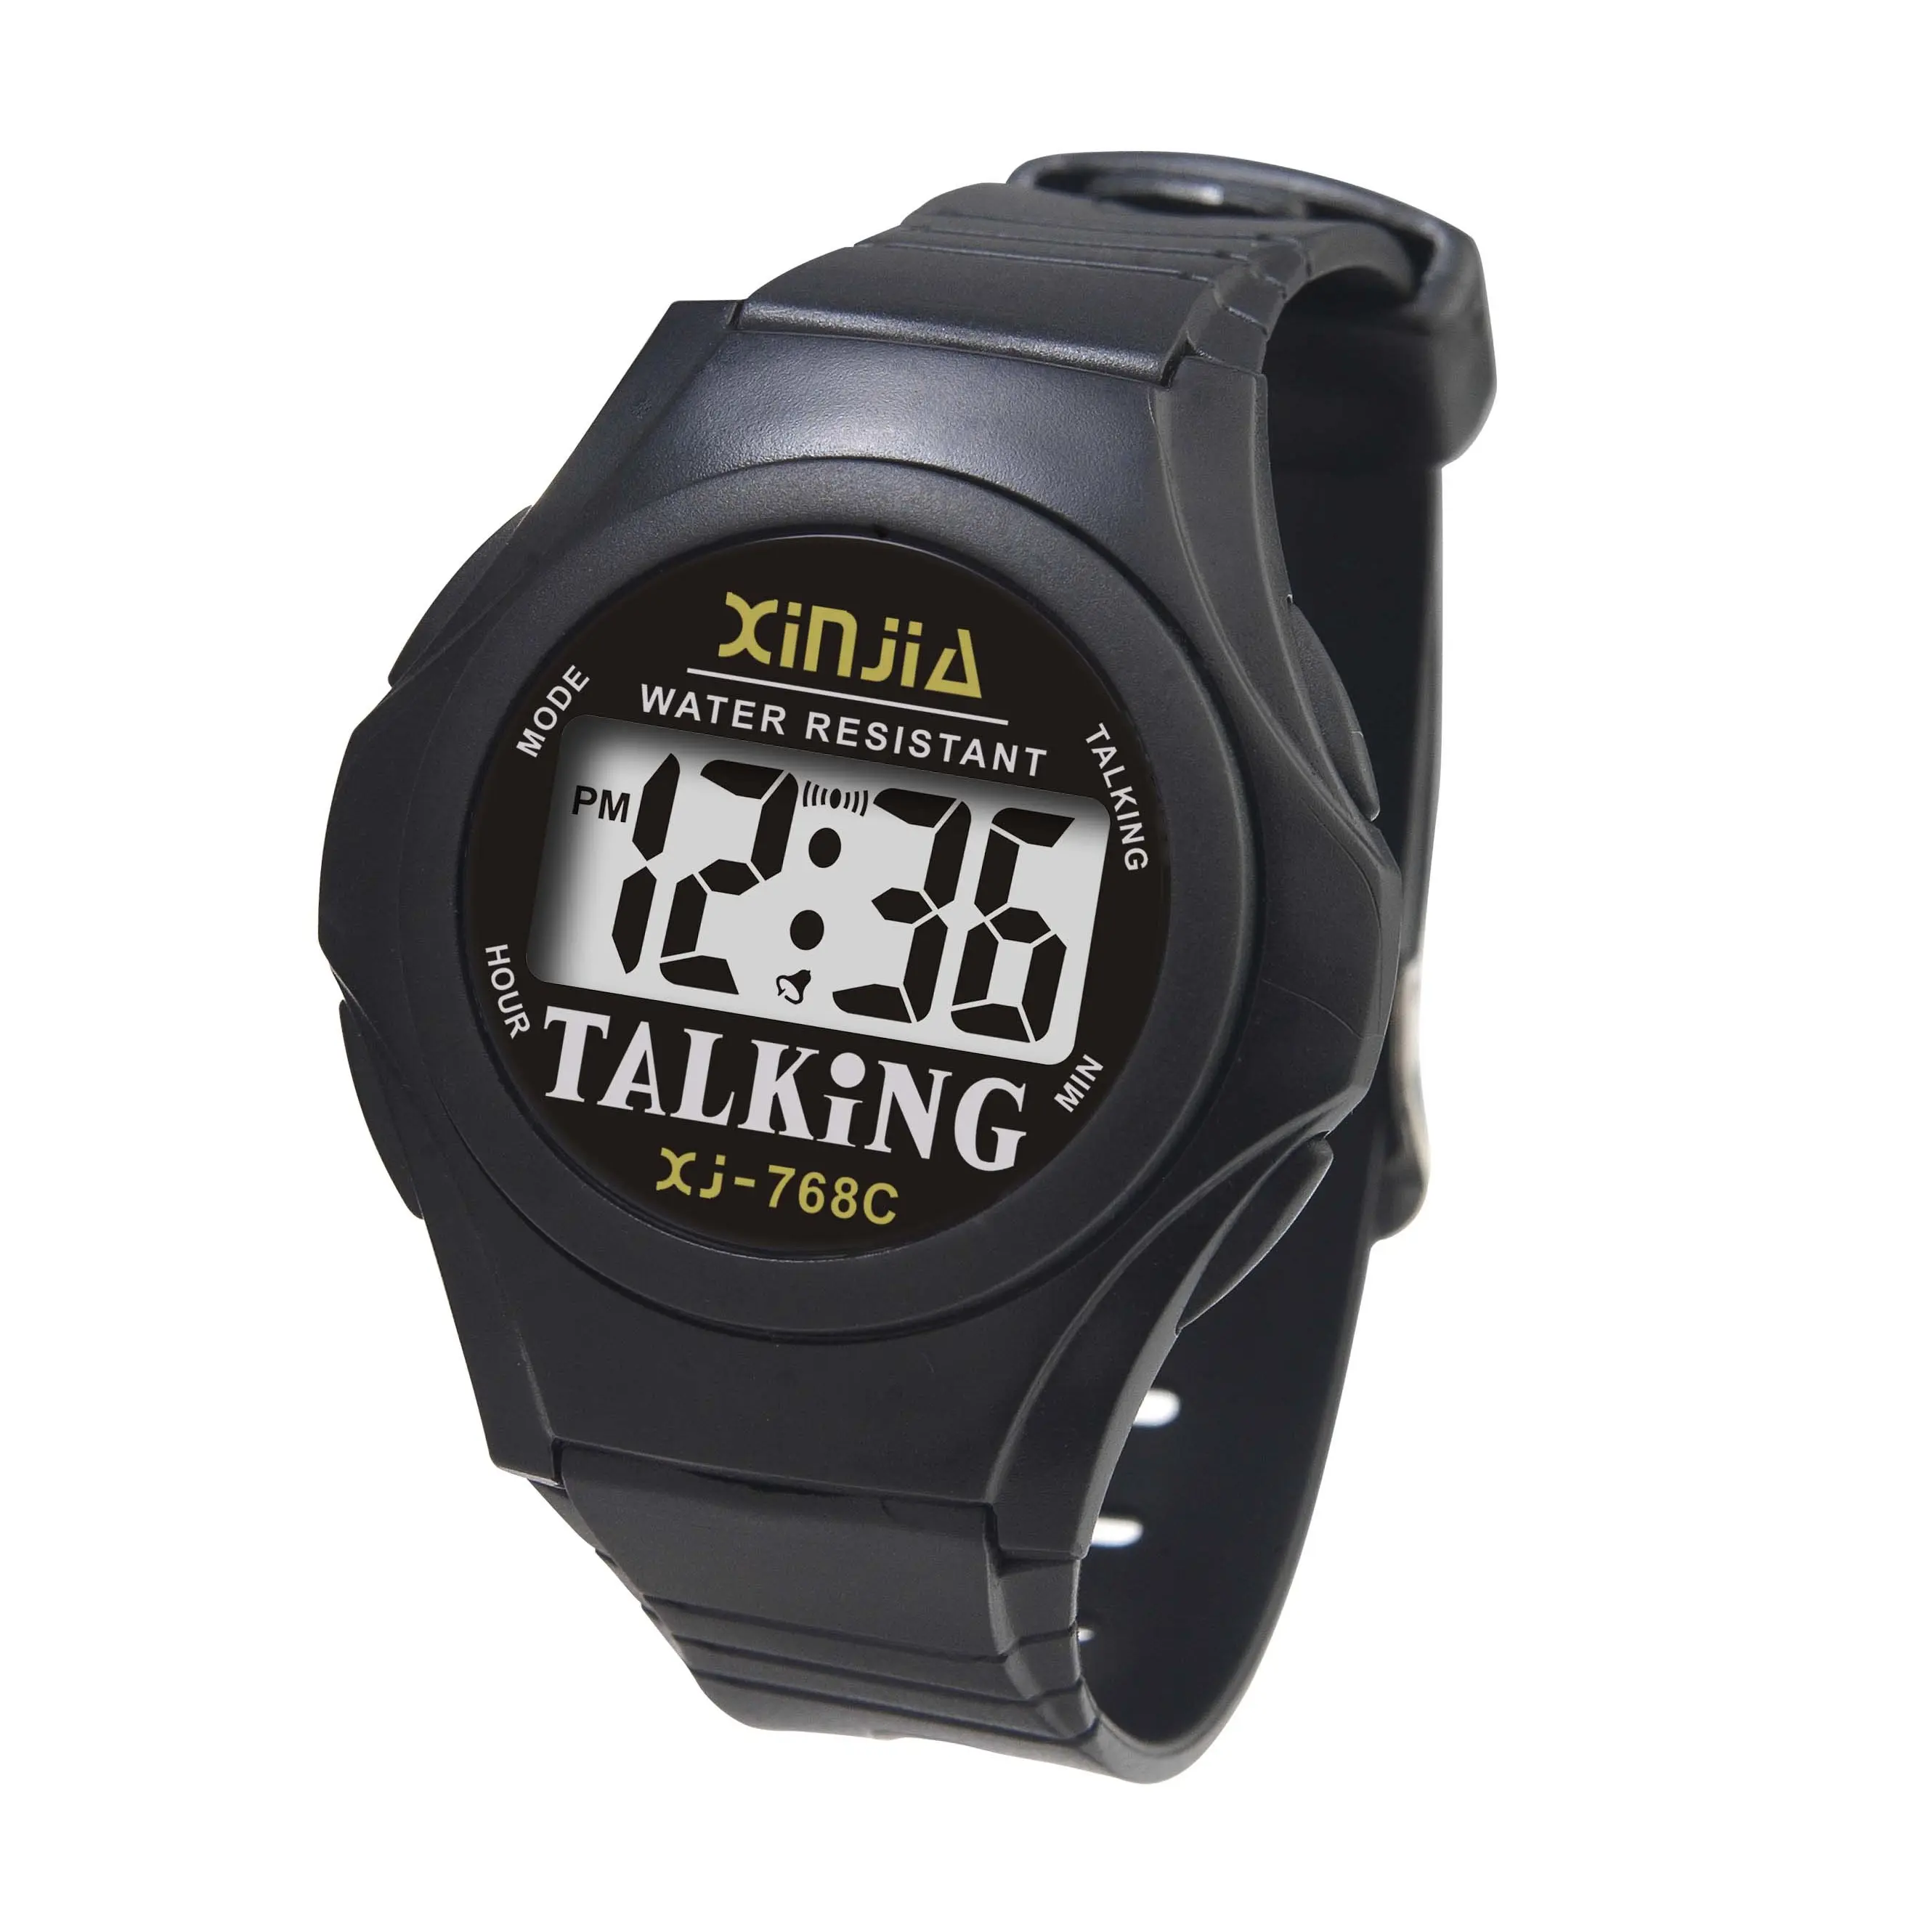 High quality Digital watch xj-768 digital cheap talking watch for old People and kids watch